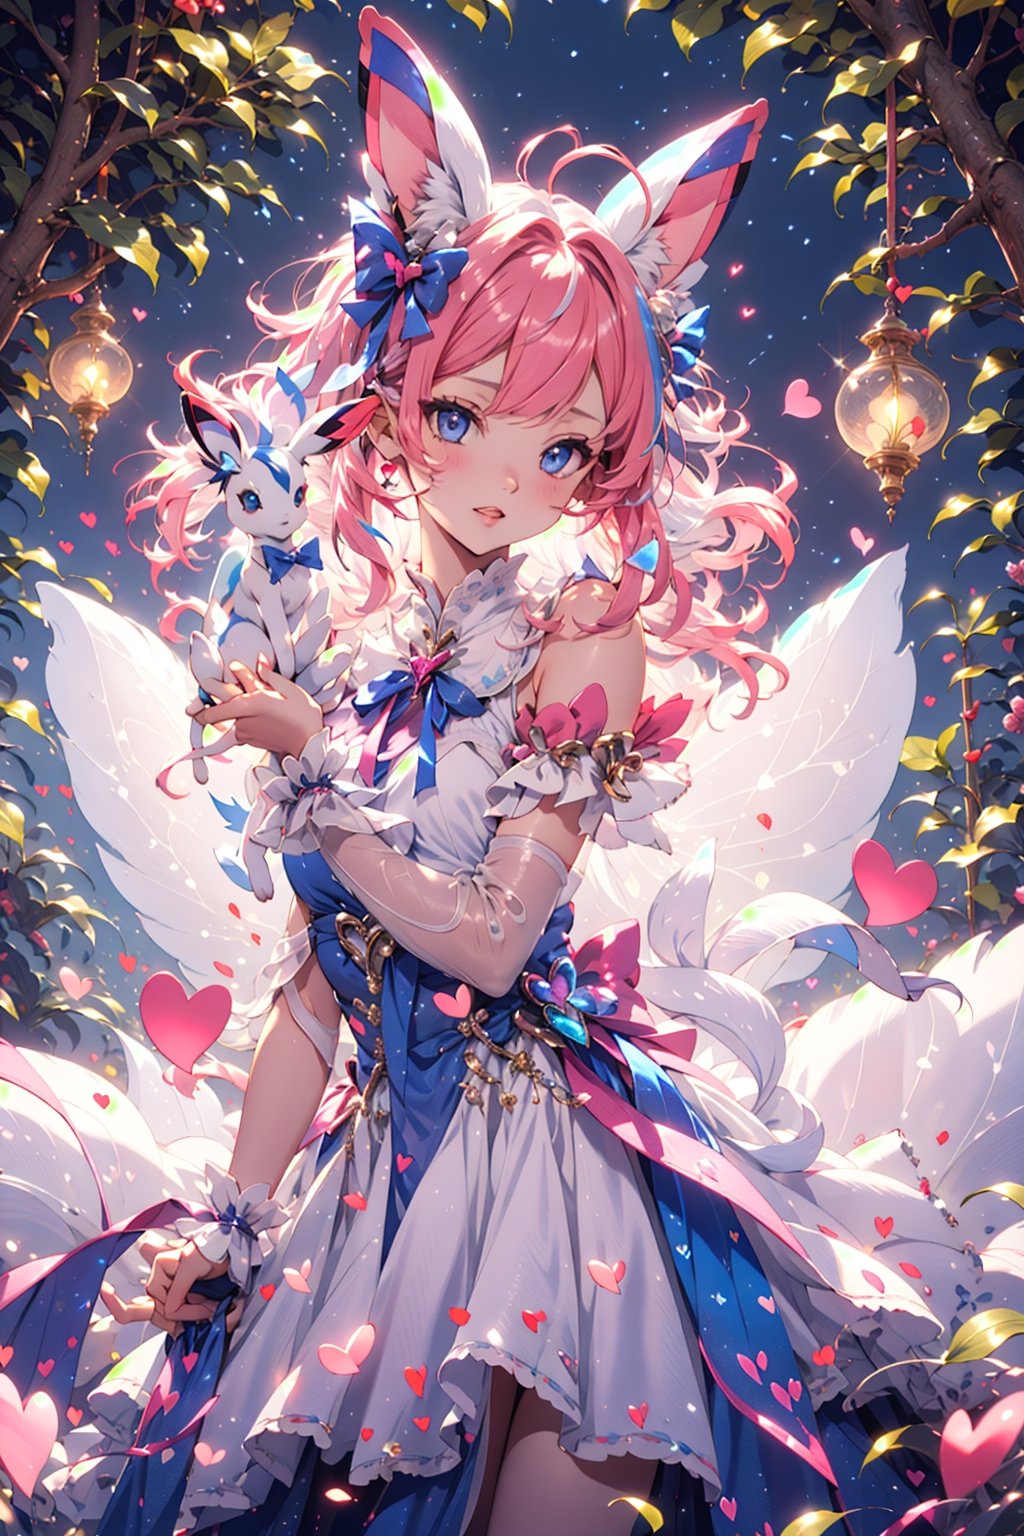 sylveon, human, pink hair, ribbons, fairy-like appearance, long pink hair, blue eyes, frilly outfit, hearts, white dress,coloured glaze,fairy